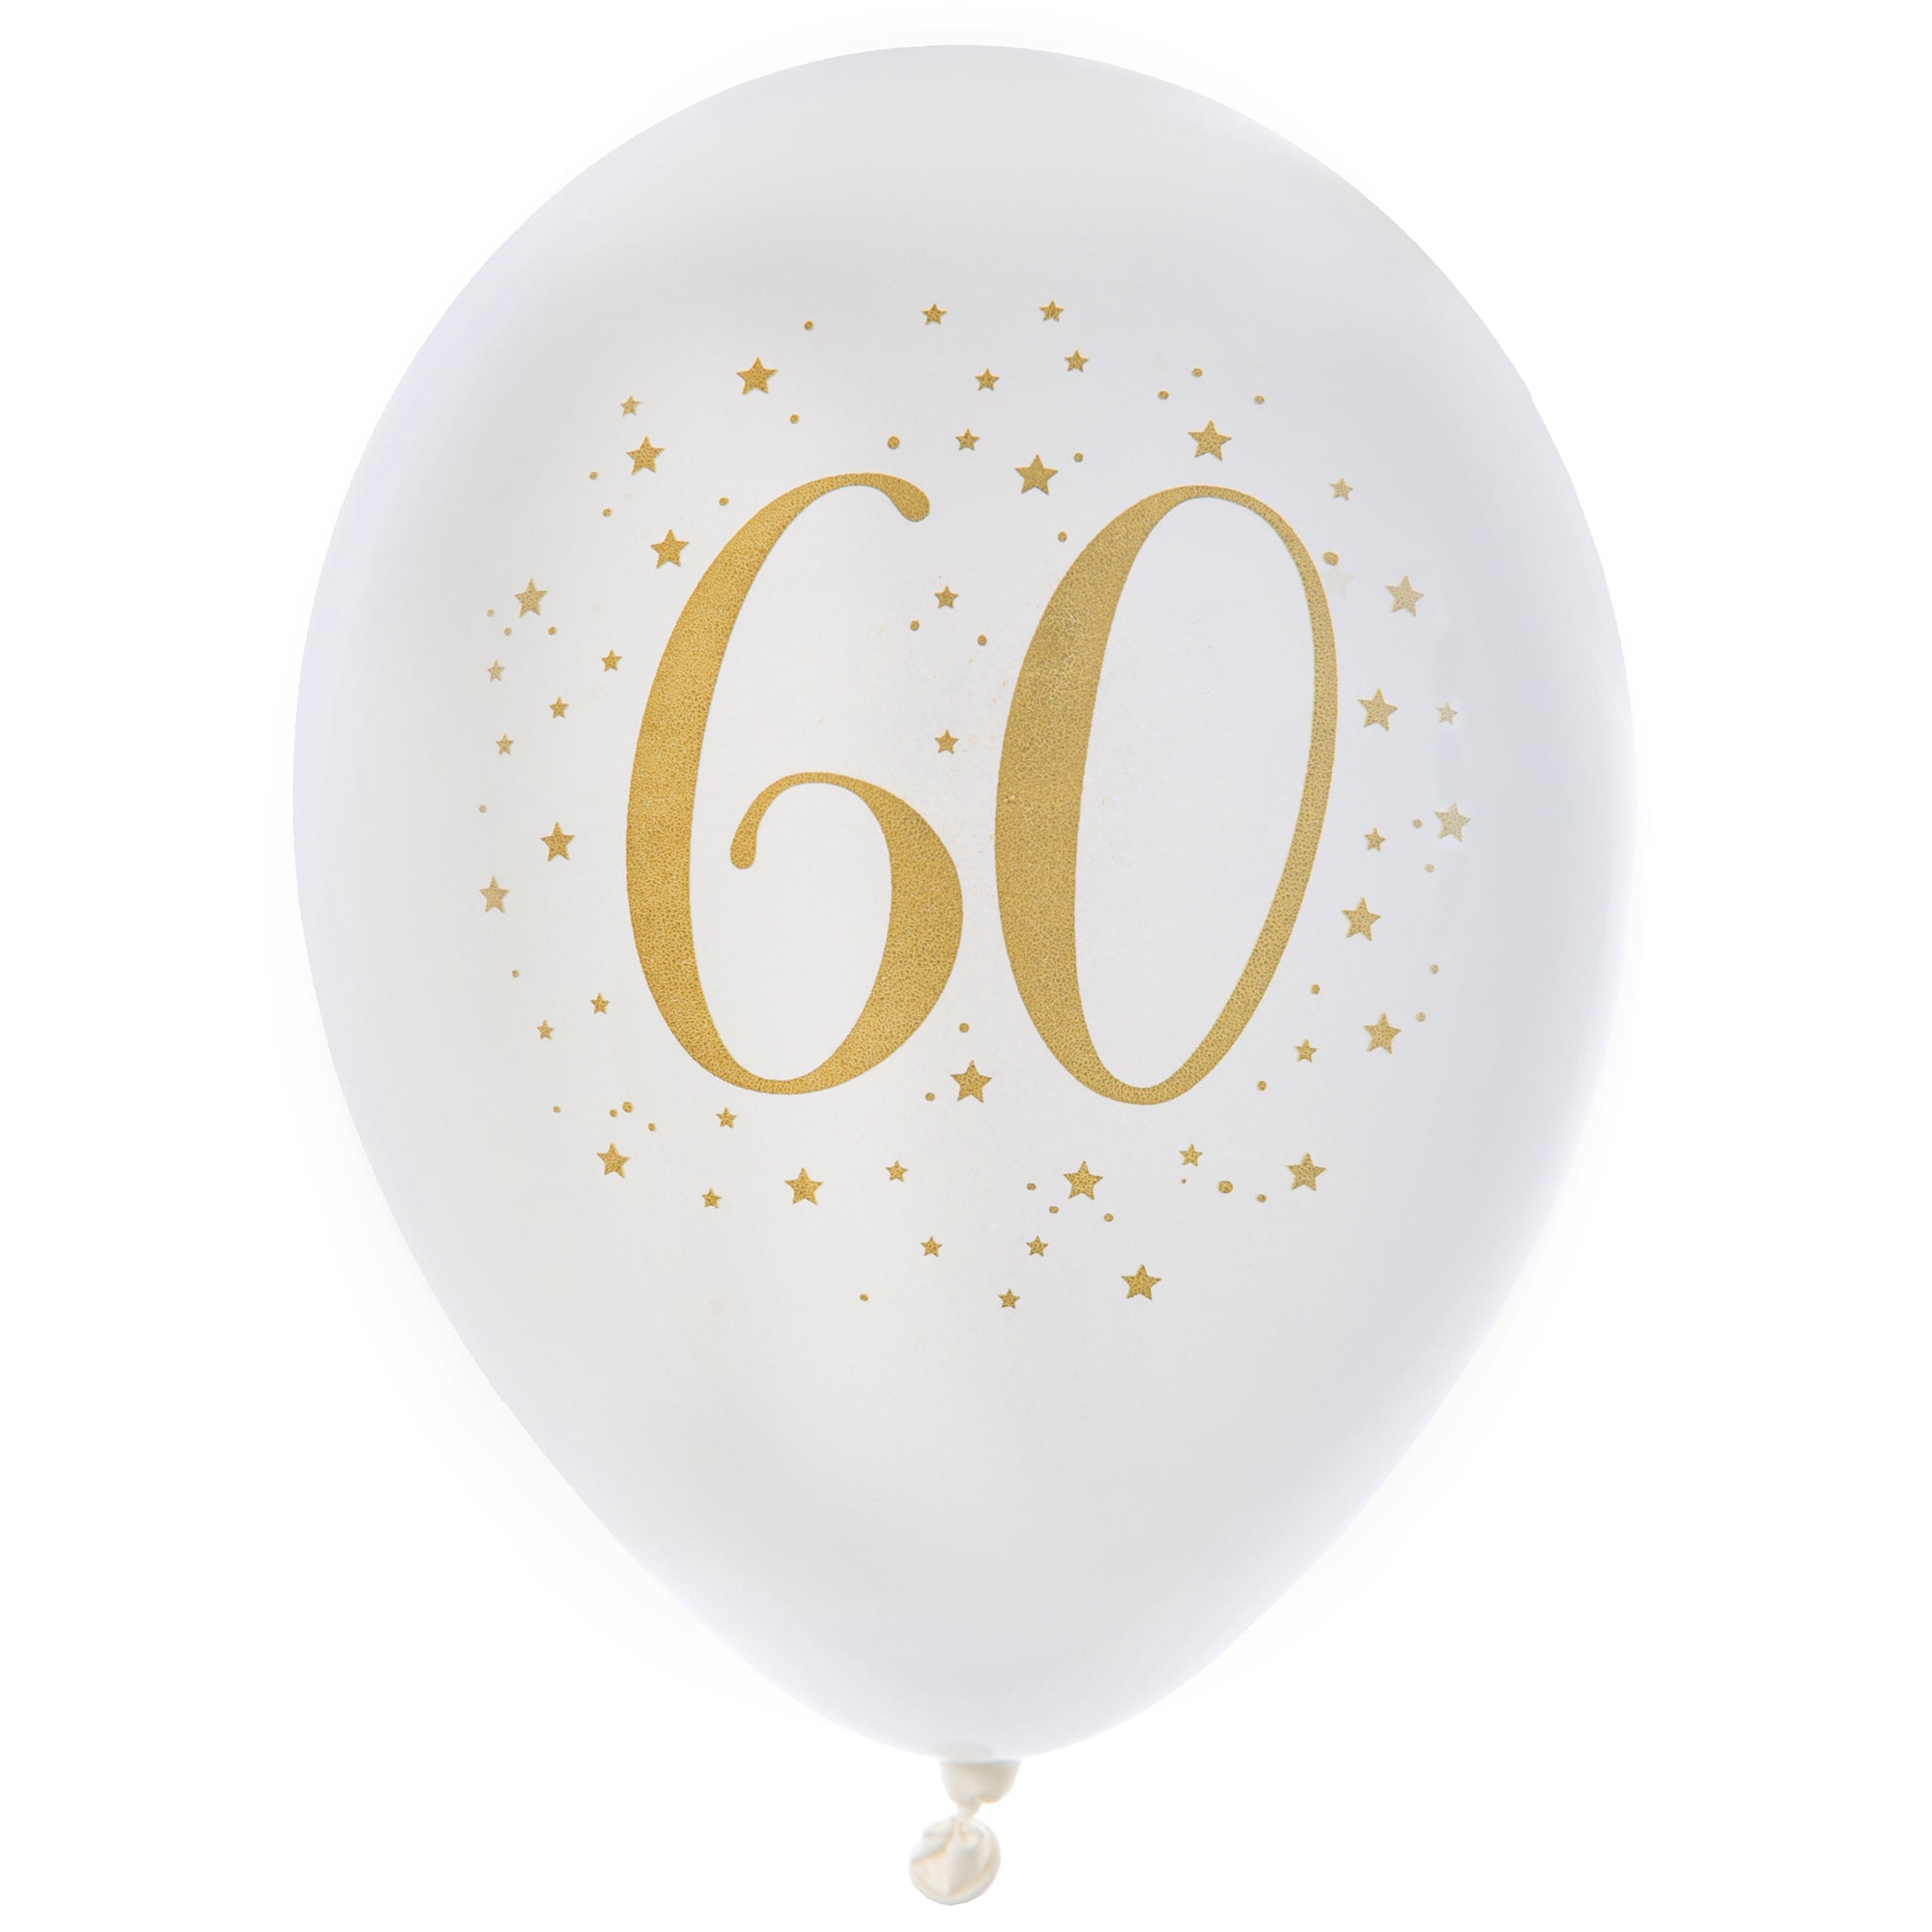 Age 60 8 Printed Latex Balloons White and Gold 9in